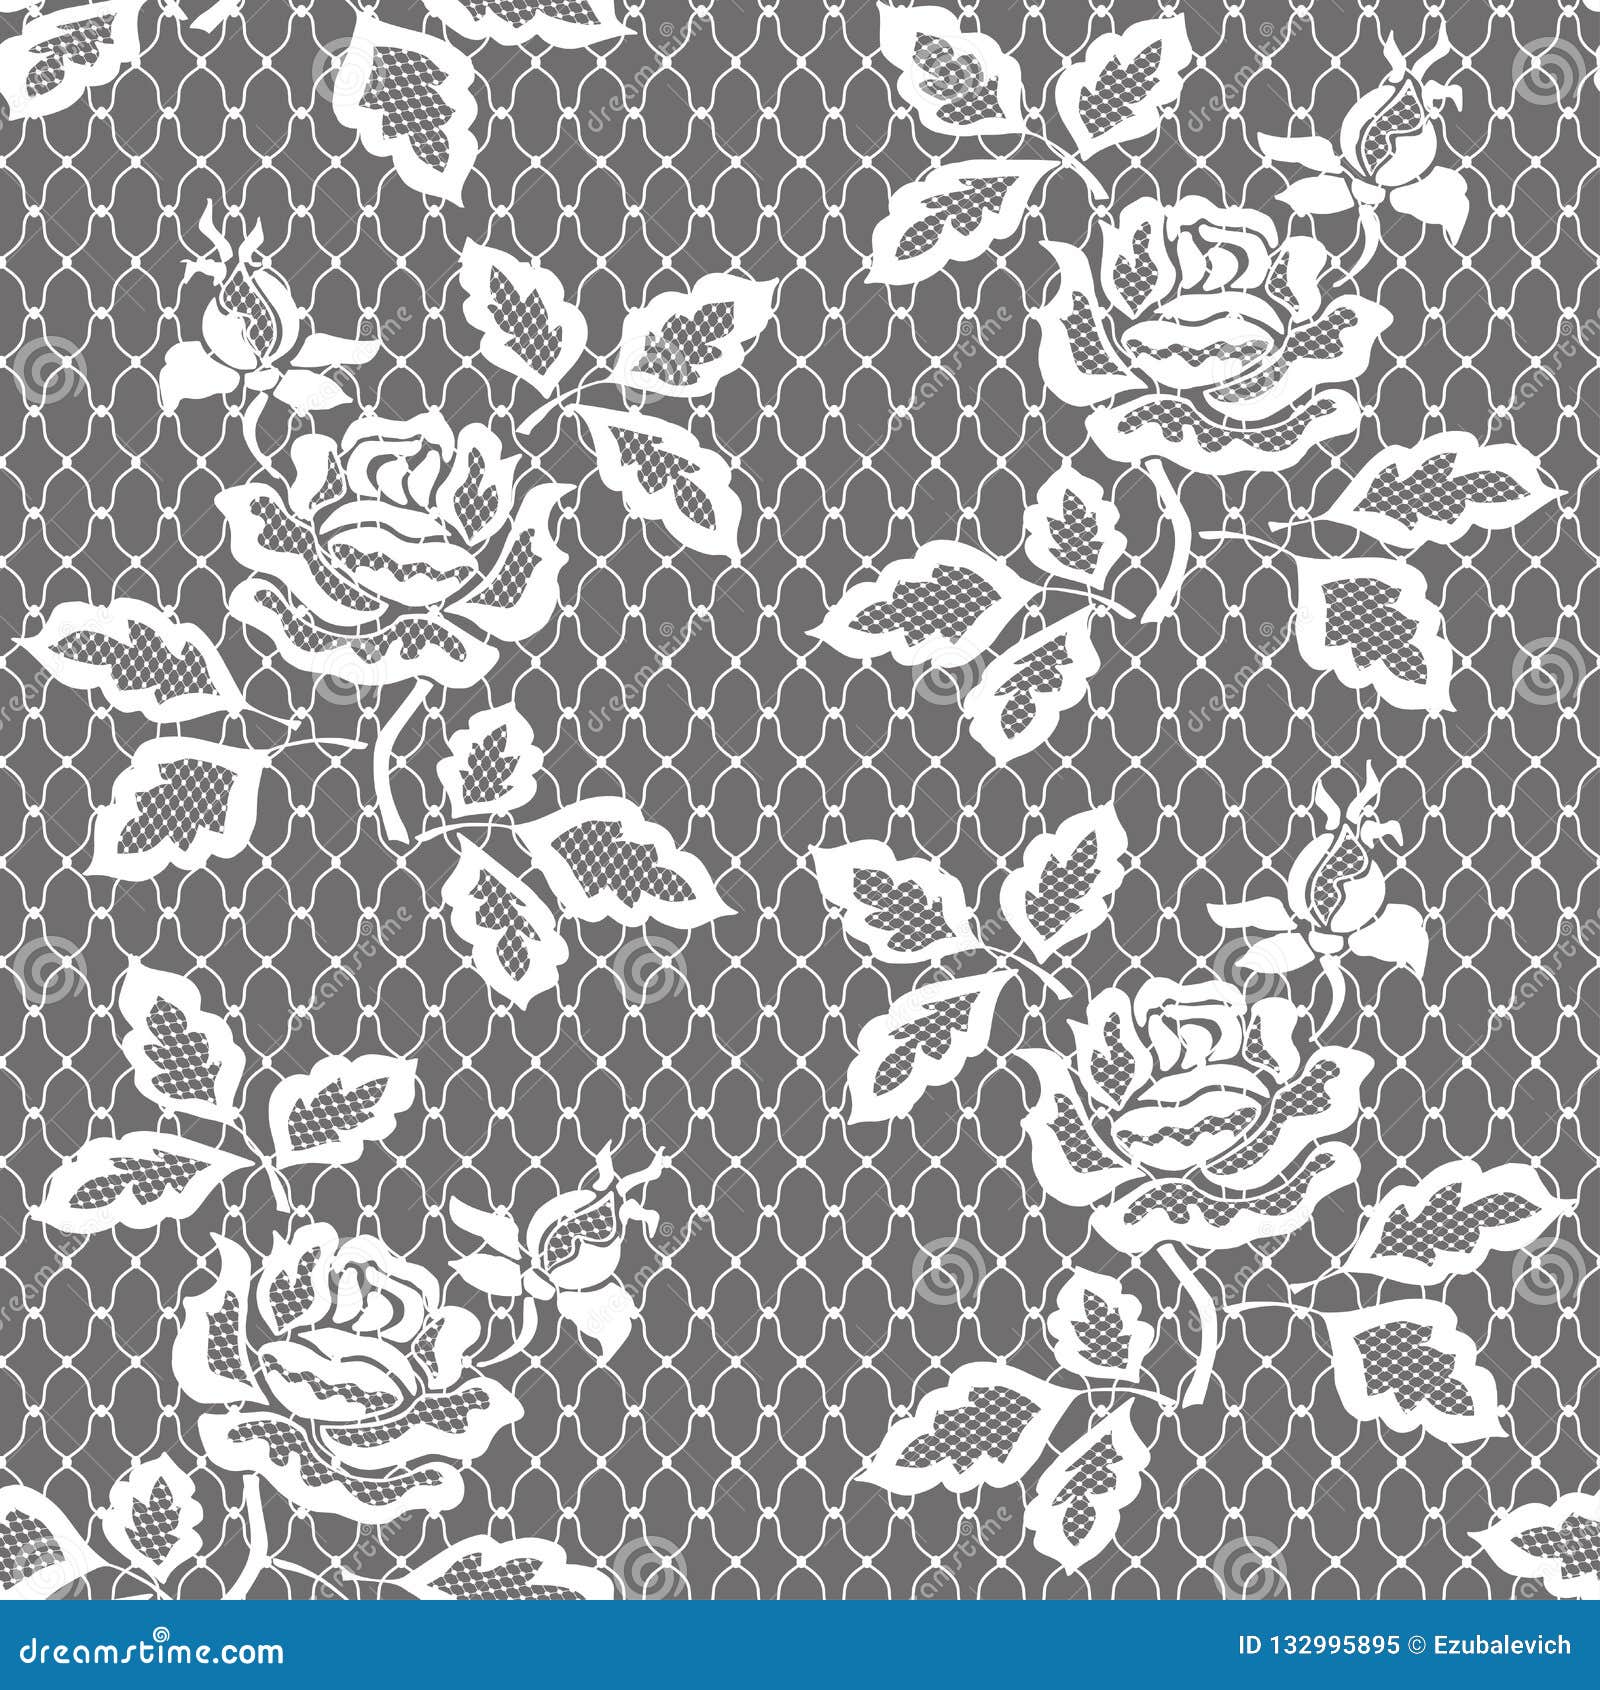 https://thumbs.dreamstime.com/z/white-seamless-lace-pattern-rose-transparent-background-floral-132995895.jpg